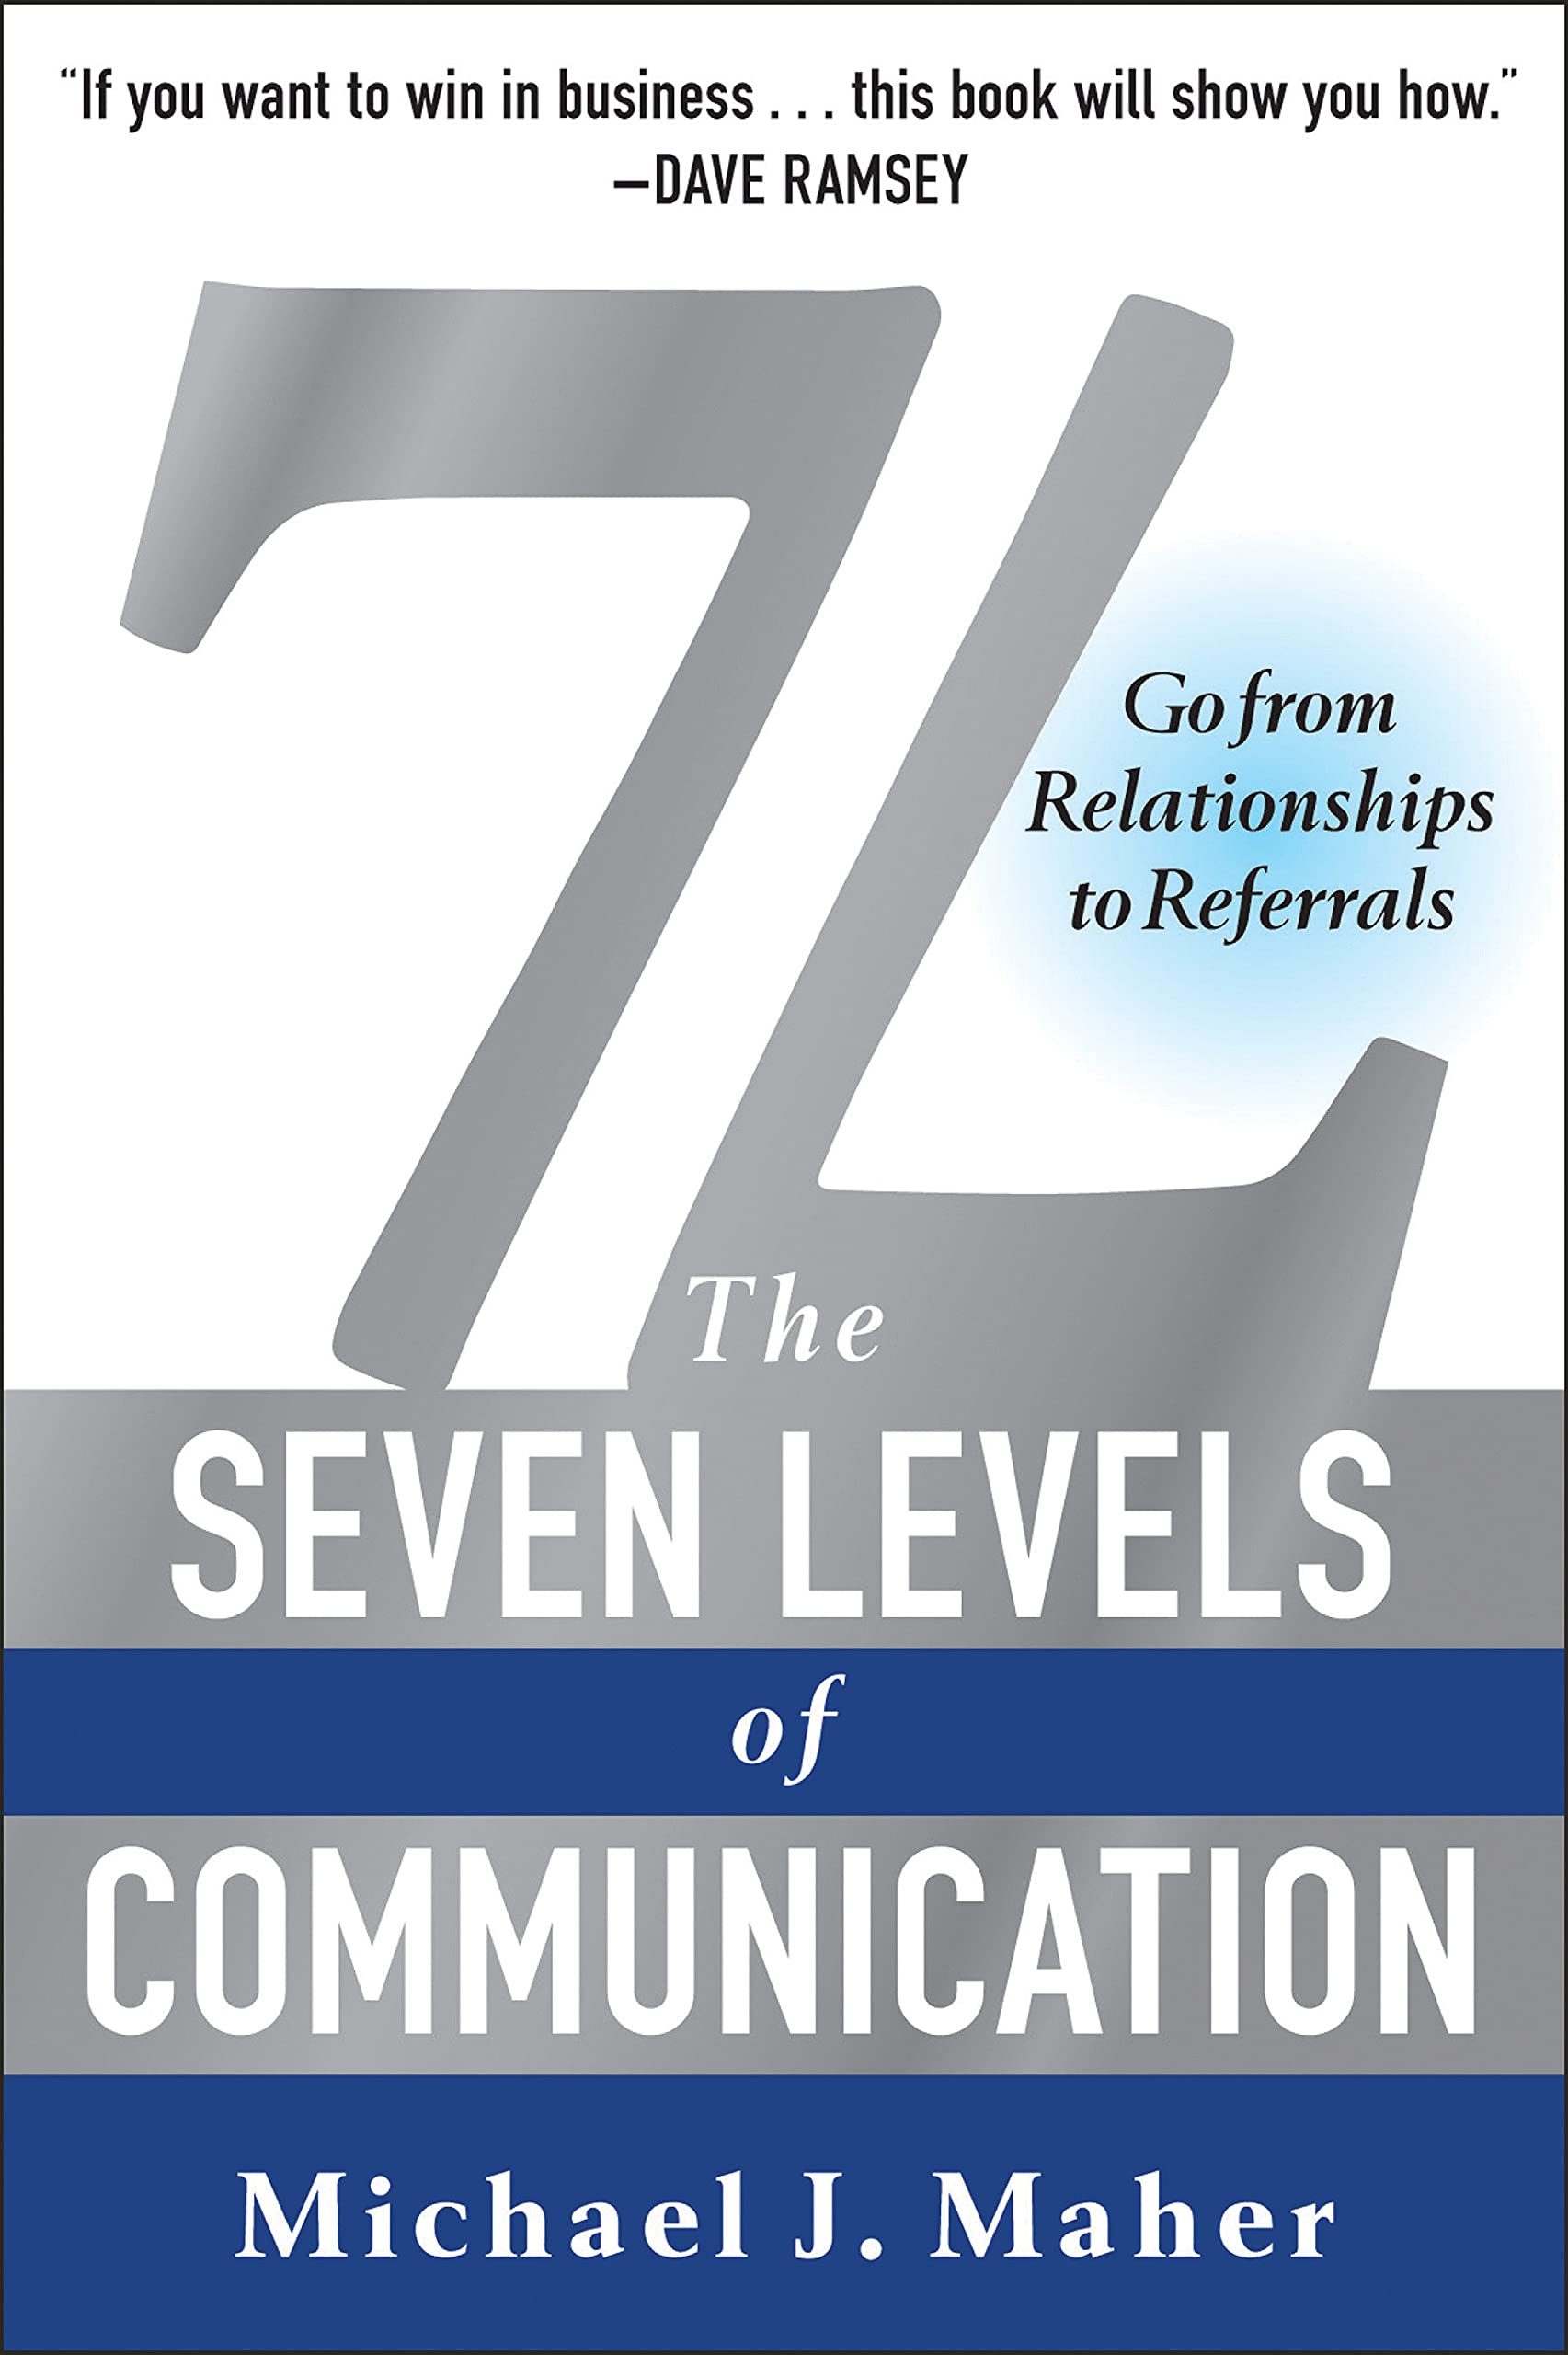 7L The Seven Levels of Communication written by Michael J. Maher book cover